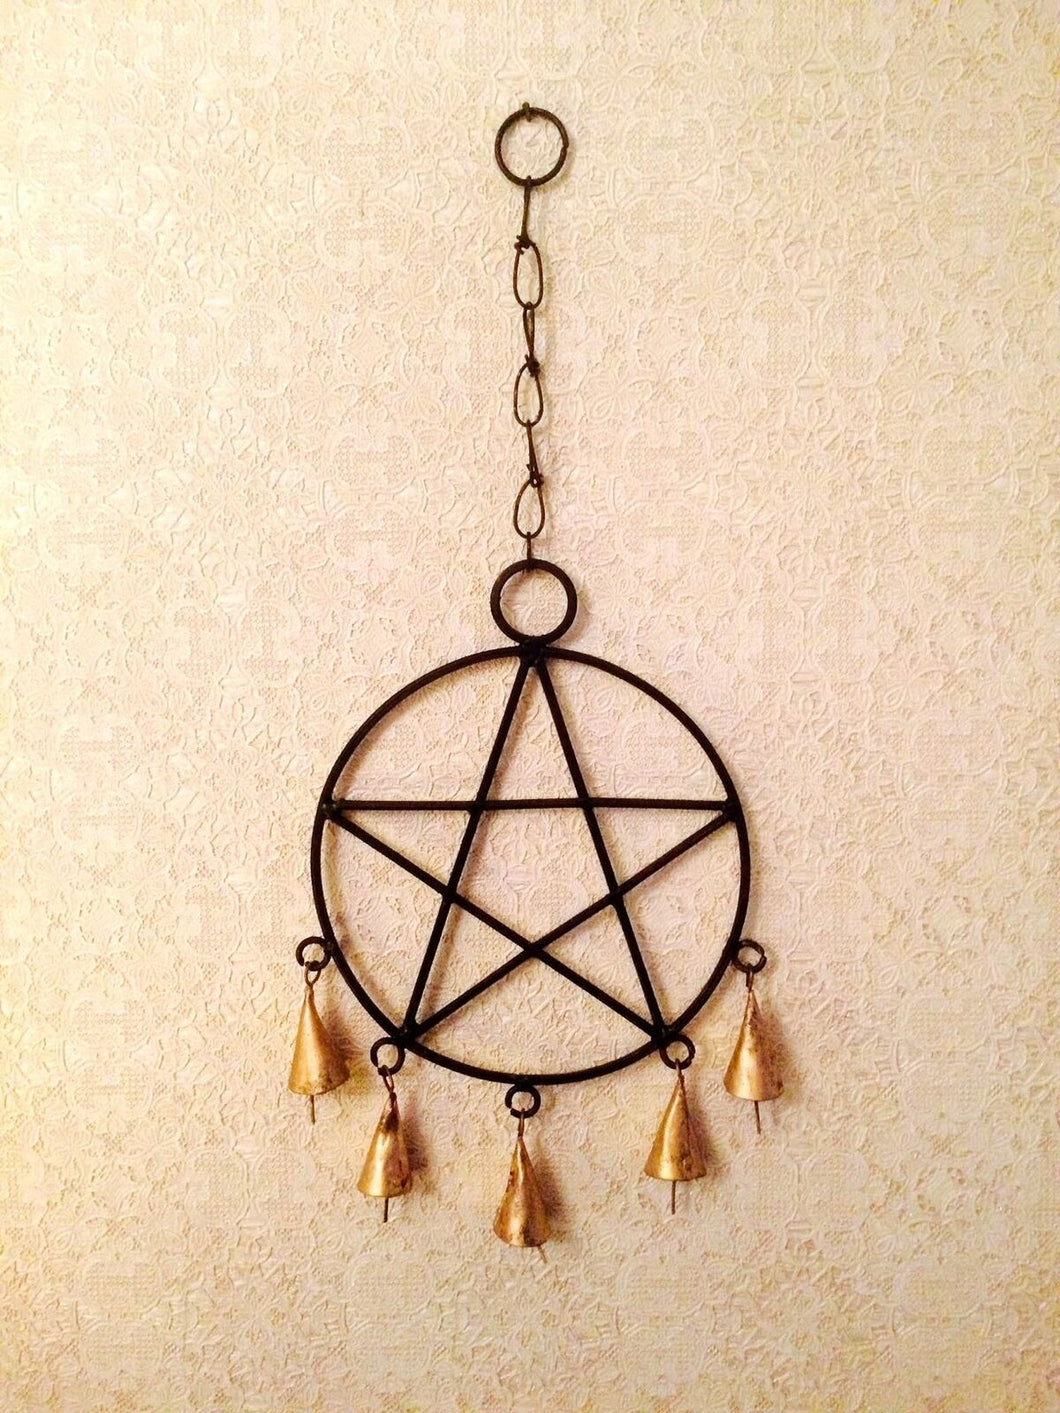 Pentagram Wind Chime with Bells Wiccan Pagan Decor Wall Hanging Pentacle